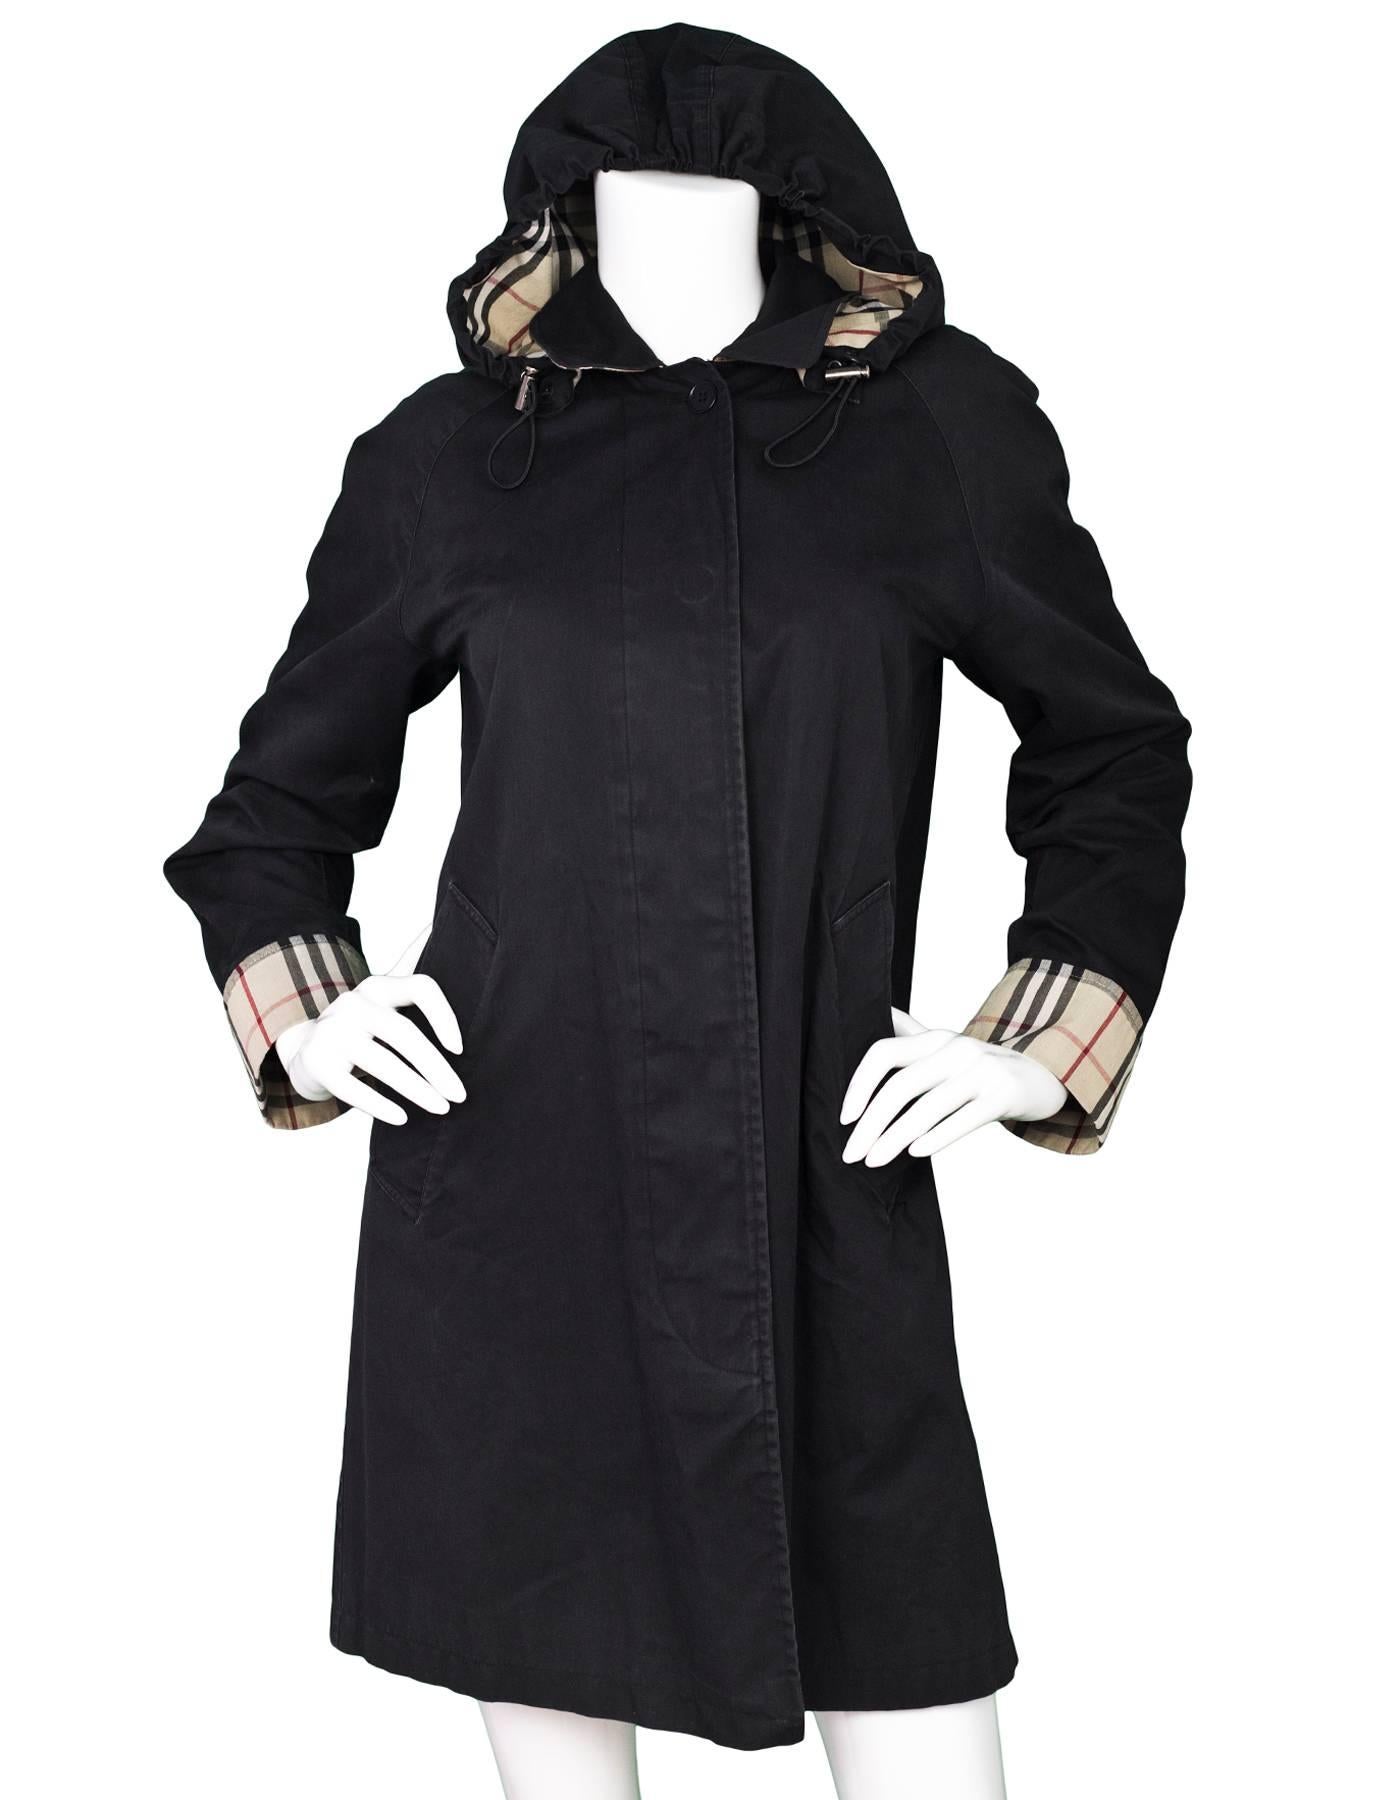 Burberry Black Raincoat with Nova Check Lining

Color: Black
Composition: 100% cotton, 
Lining: Signature nova check
Closure/Opening: Front button closure
Exterior Pockets: Two hip pockets
Interior Pockets: None
Overall Condition: Very good